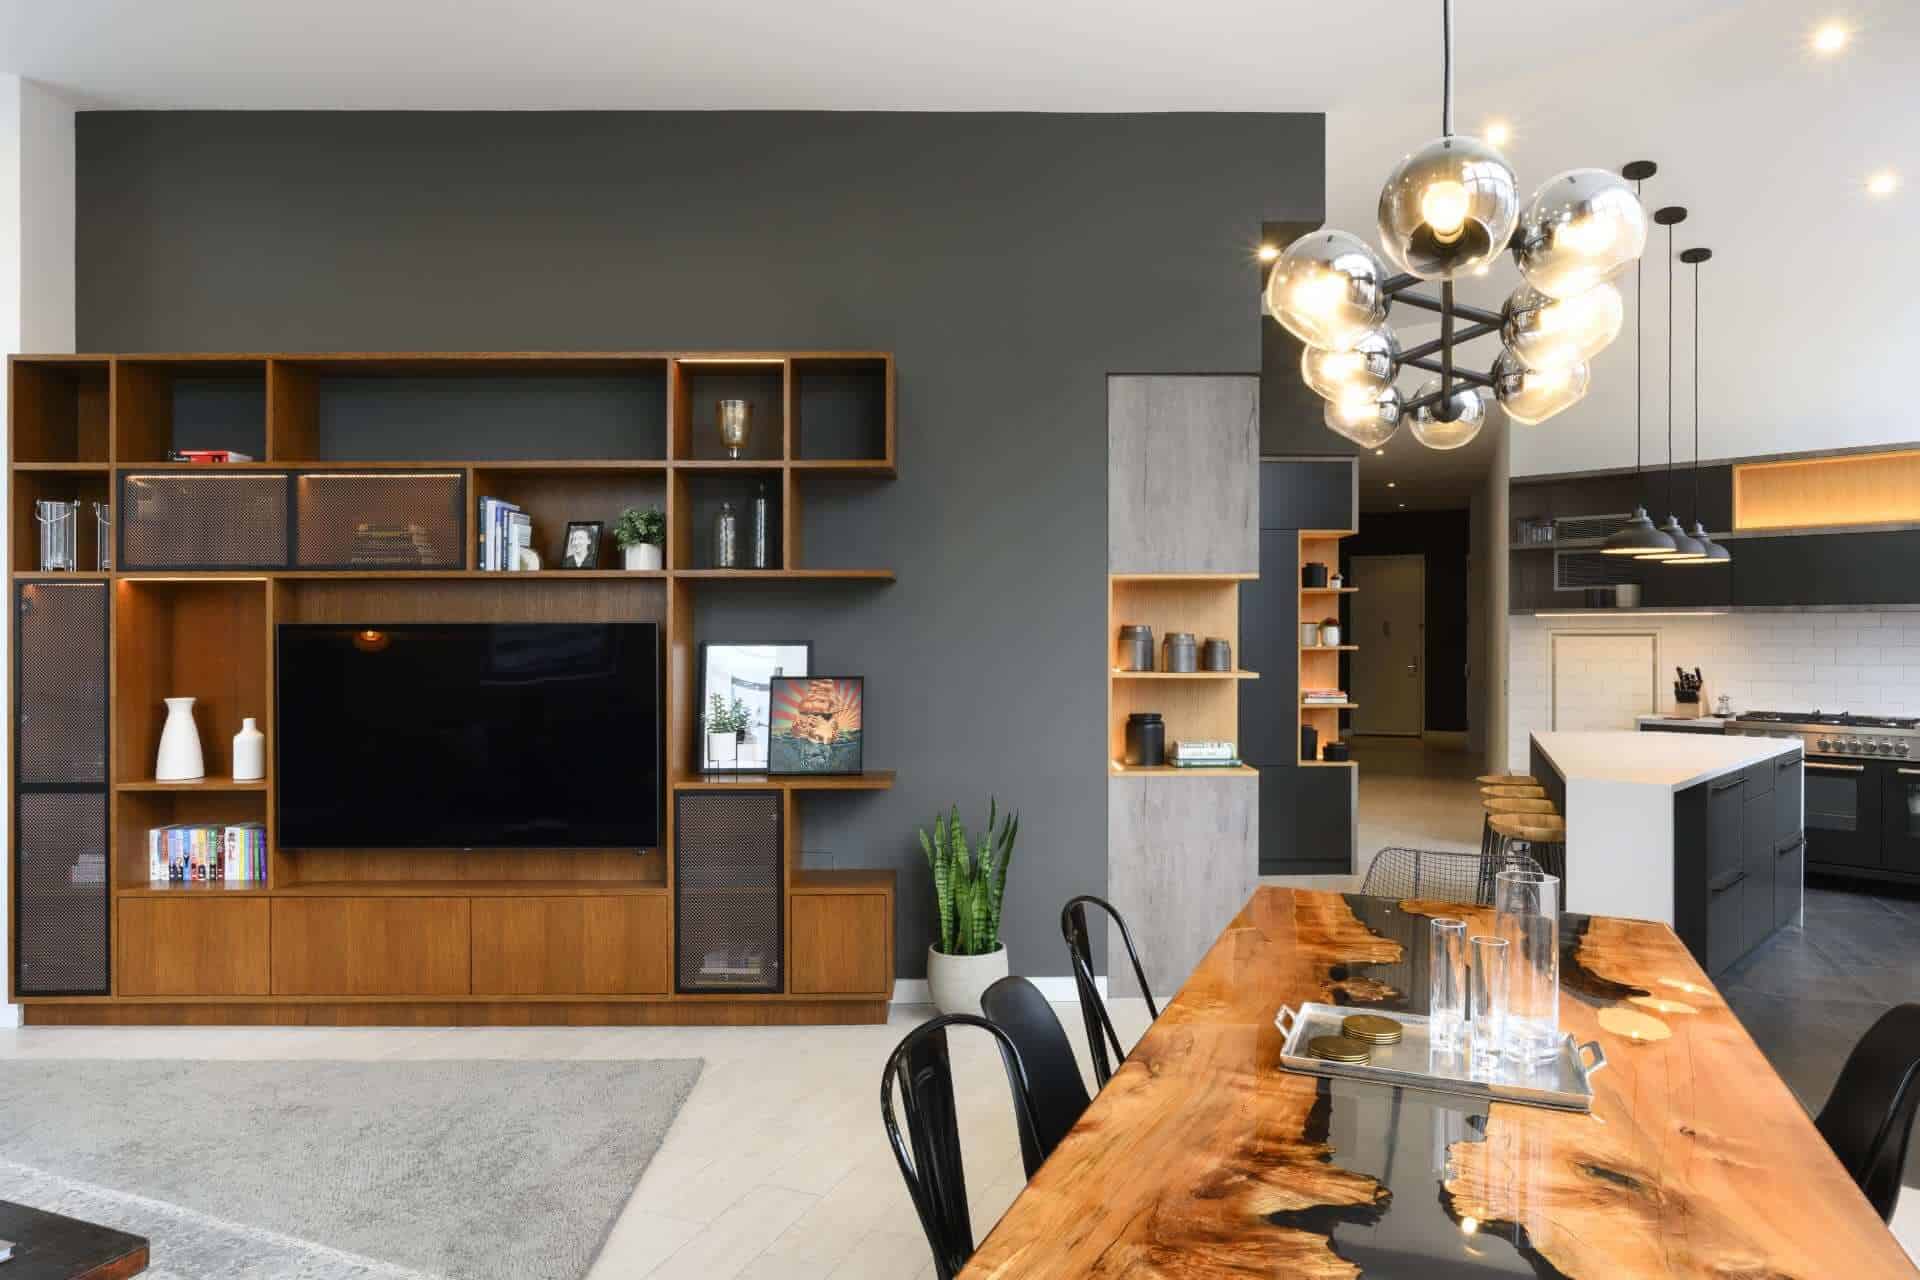 Industrial metal and wood NYC loft kitchen with entertainment center.